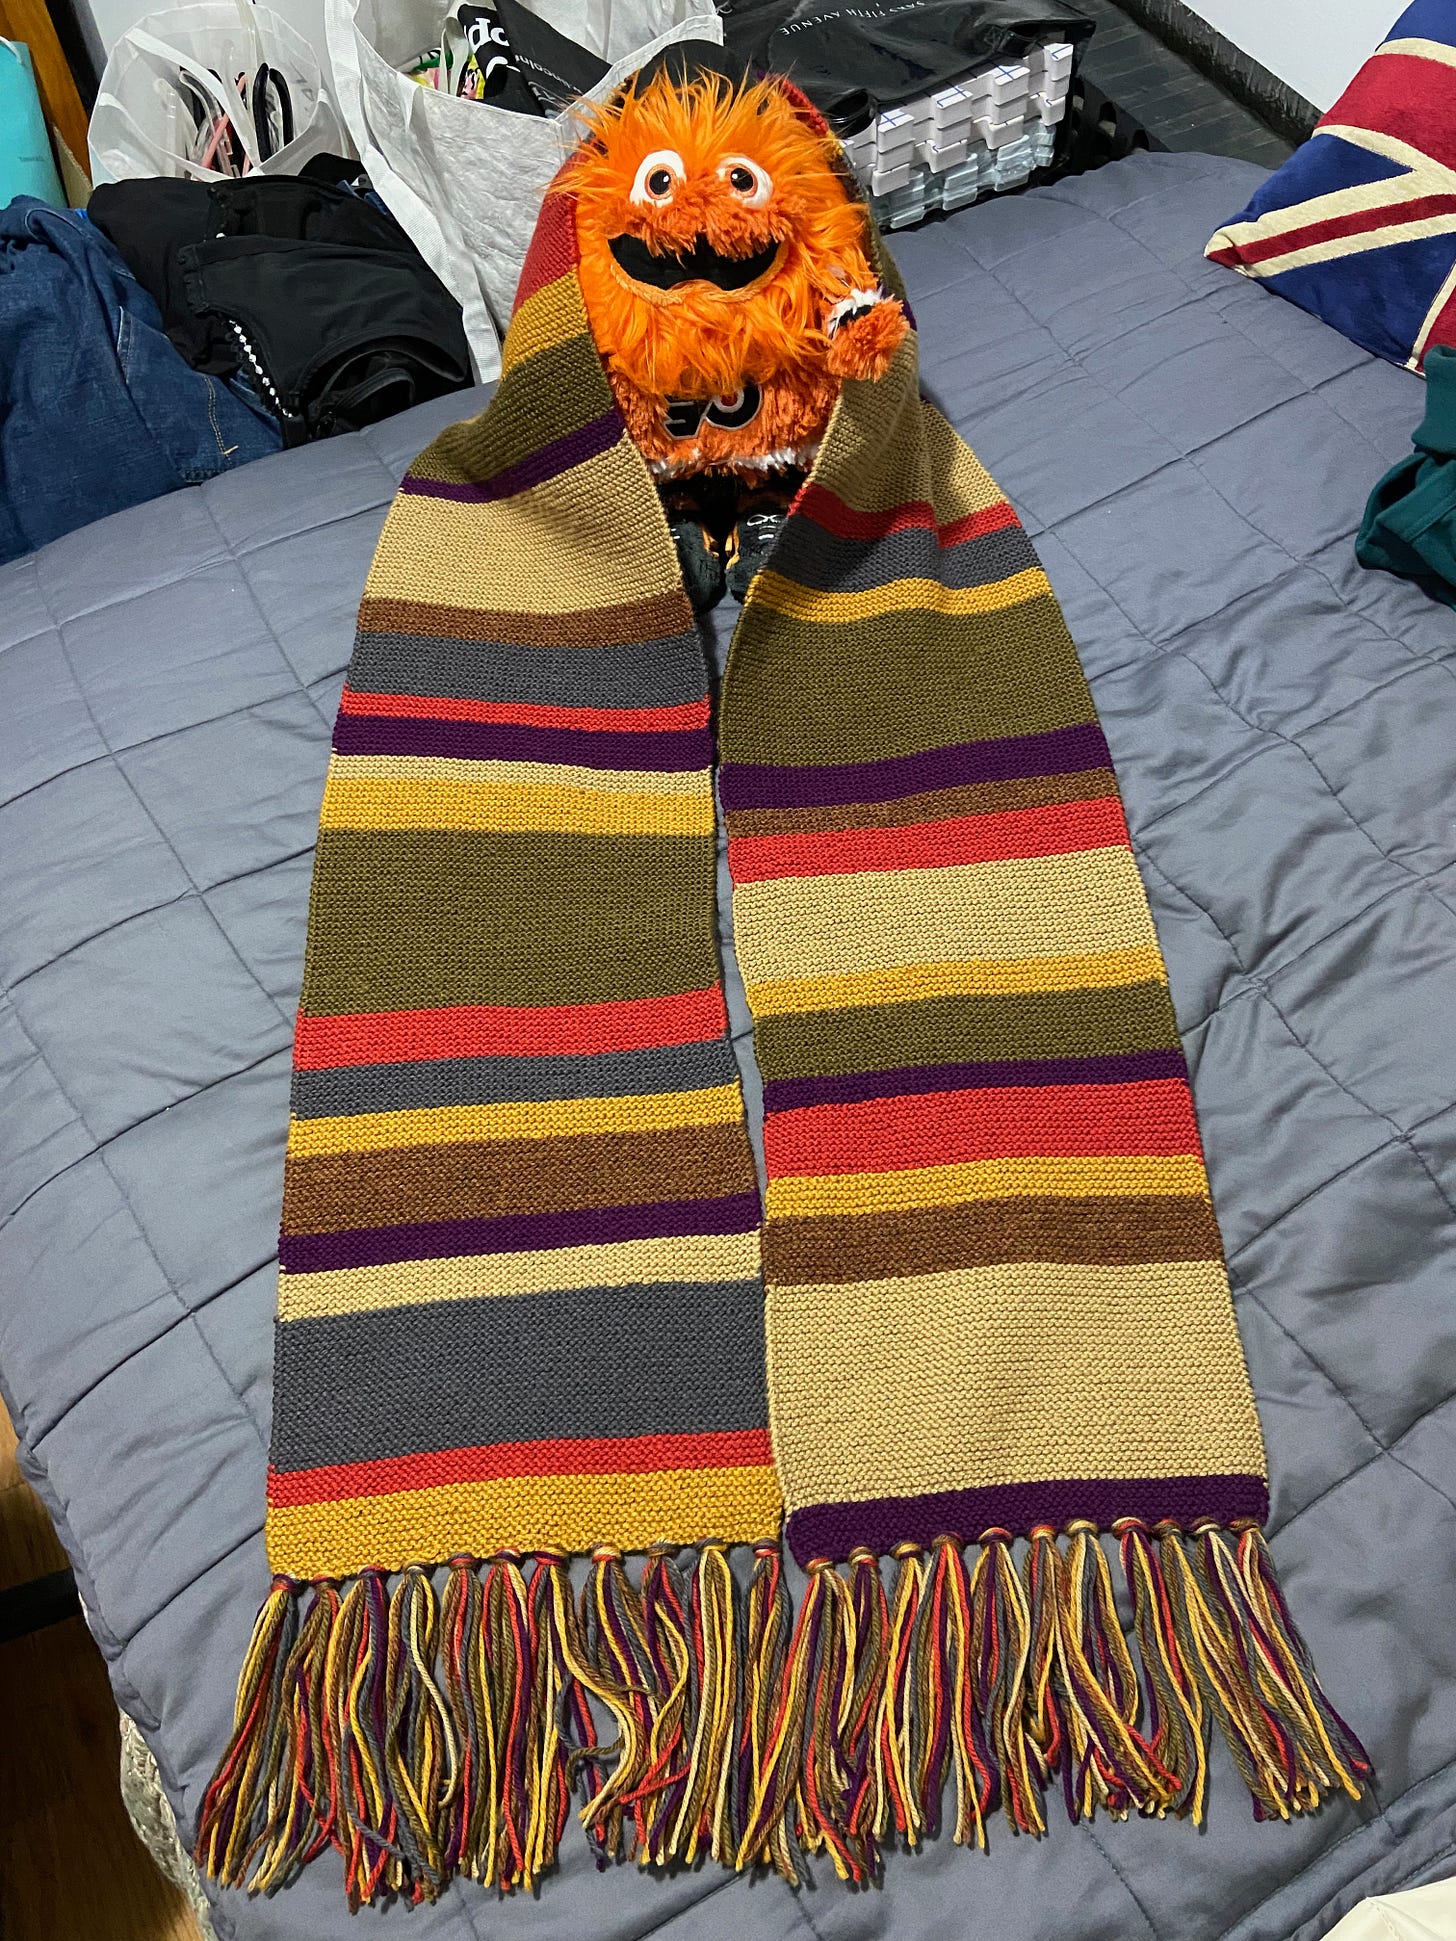 A fully knitted DOCTOR WHO scarf positioned around a miniature Gritty plush.